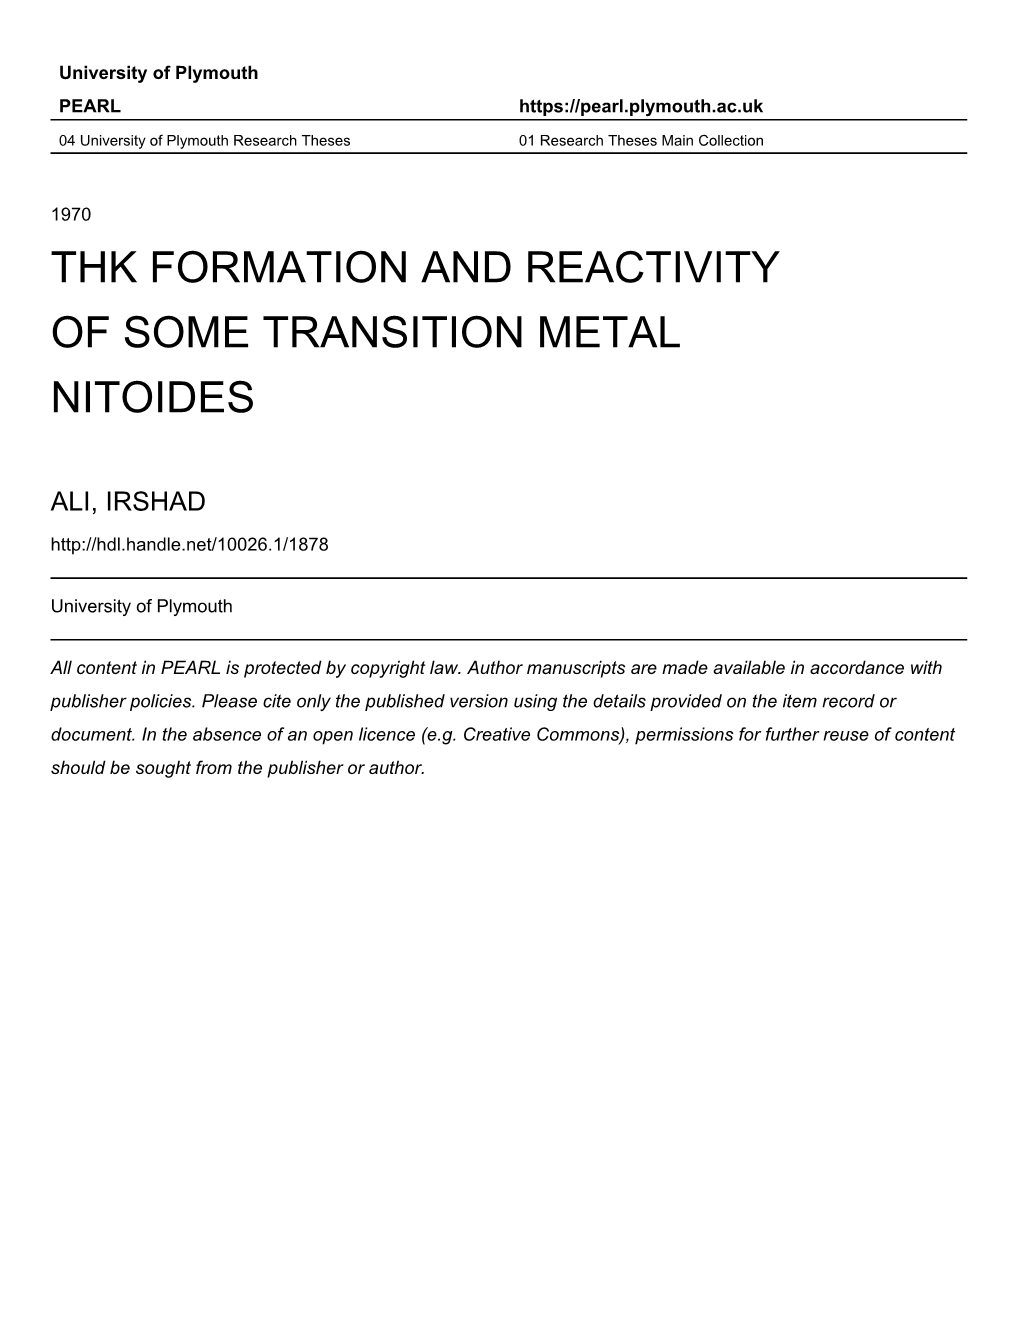 The Formation and Reactivitt of Some Transition Metal